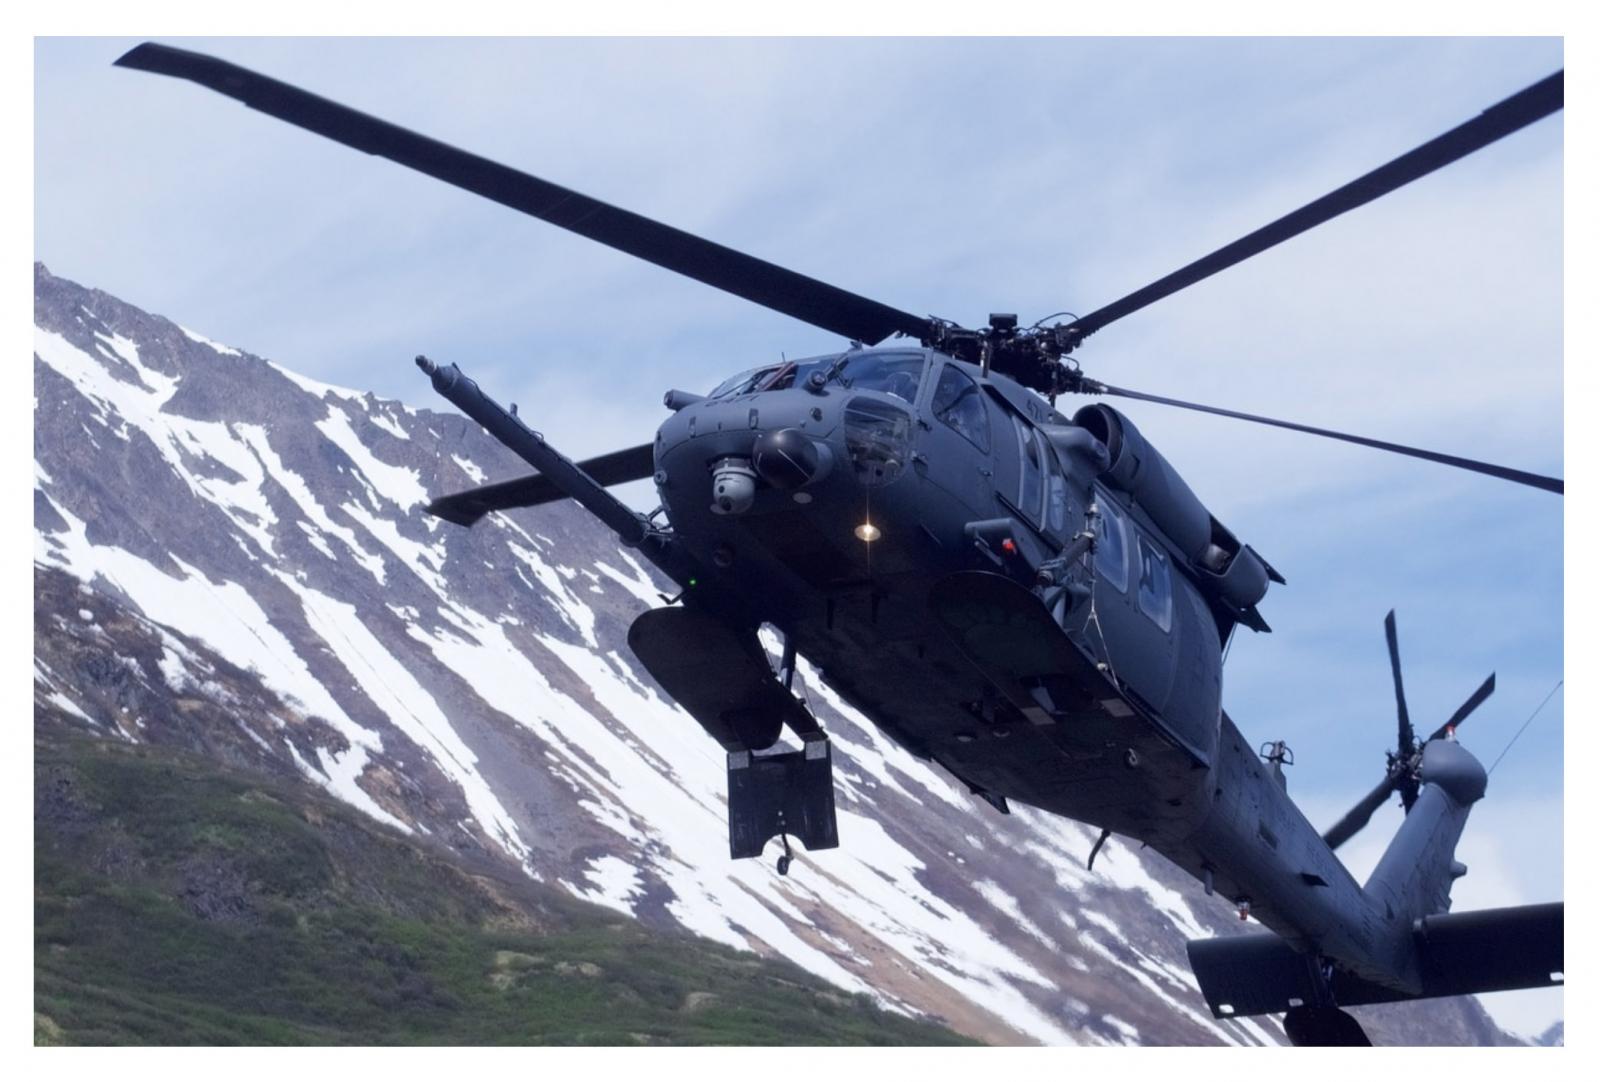  These things we do: Alaskan Air Guard search and rescue teams save lives in the wilderness and in combat